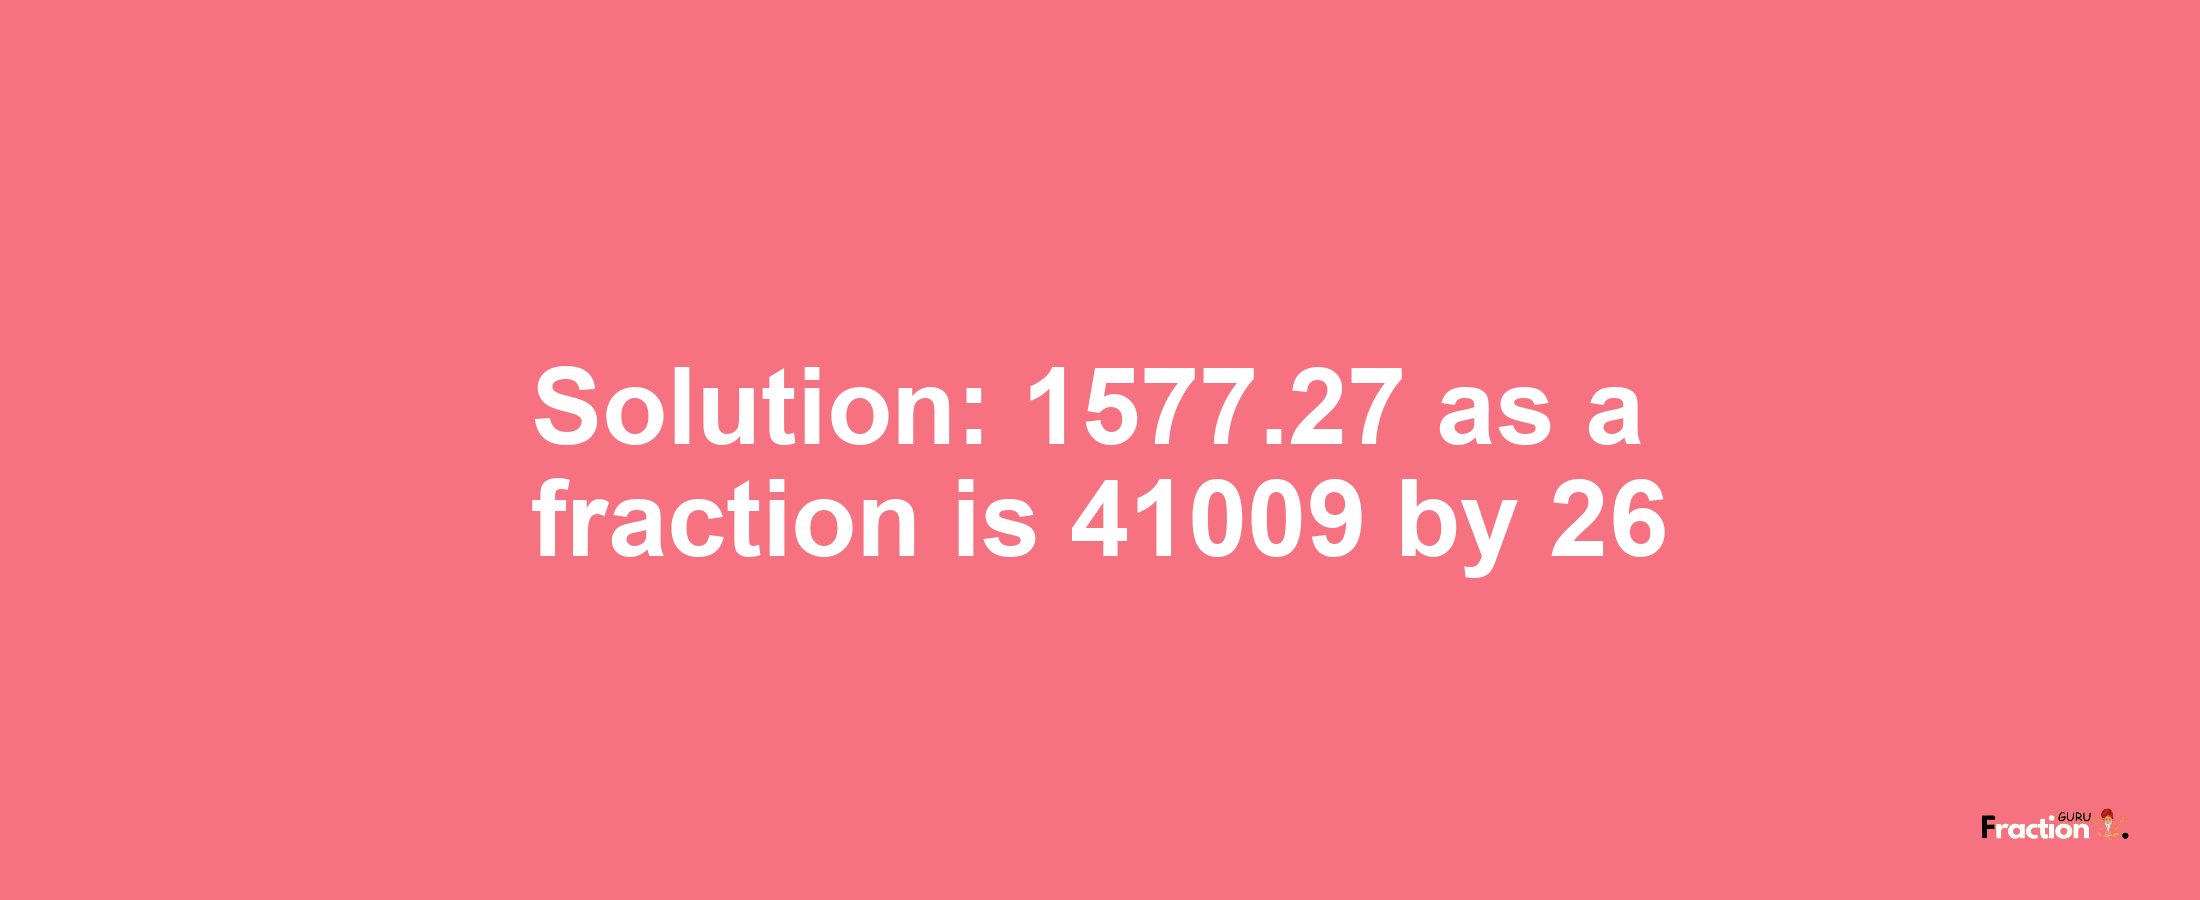 Solution:1577.27 as a fraction is 41009/26